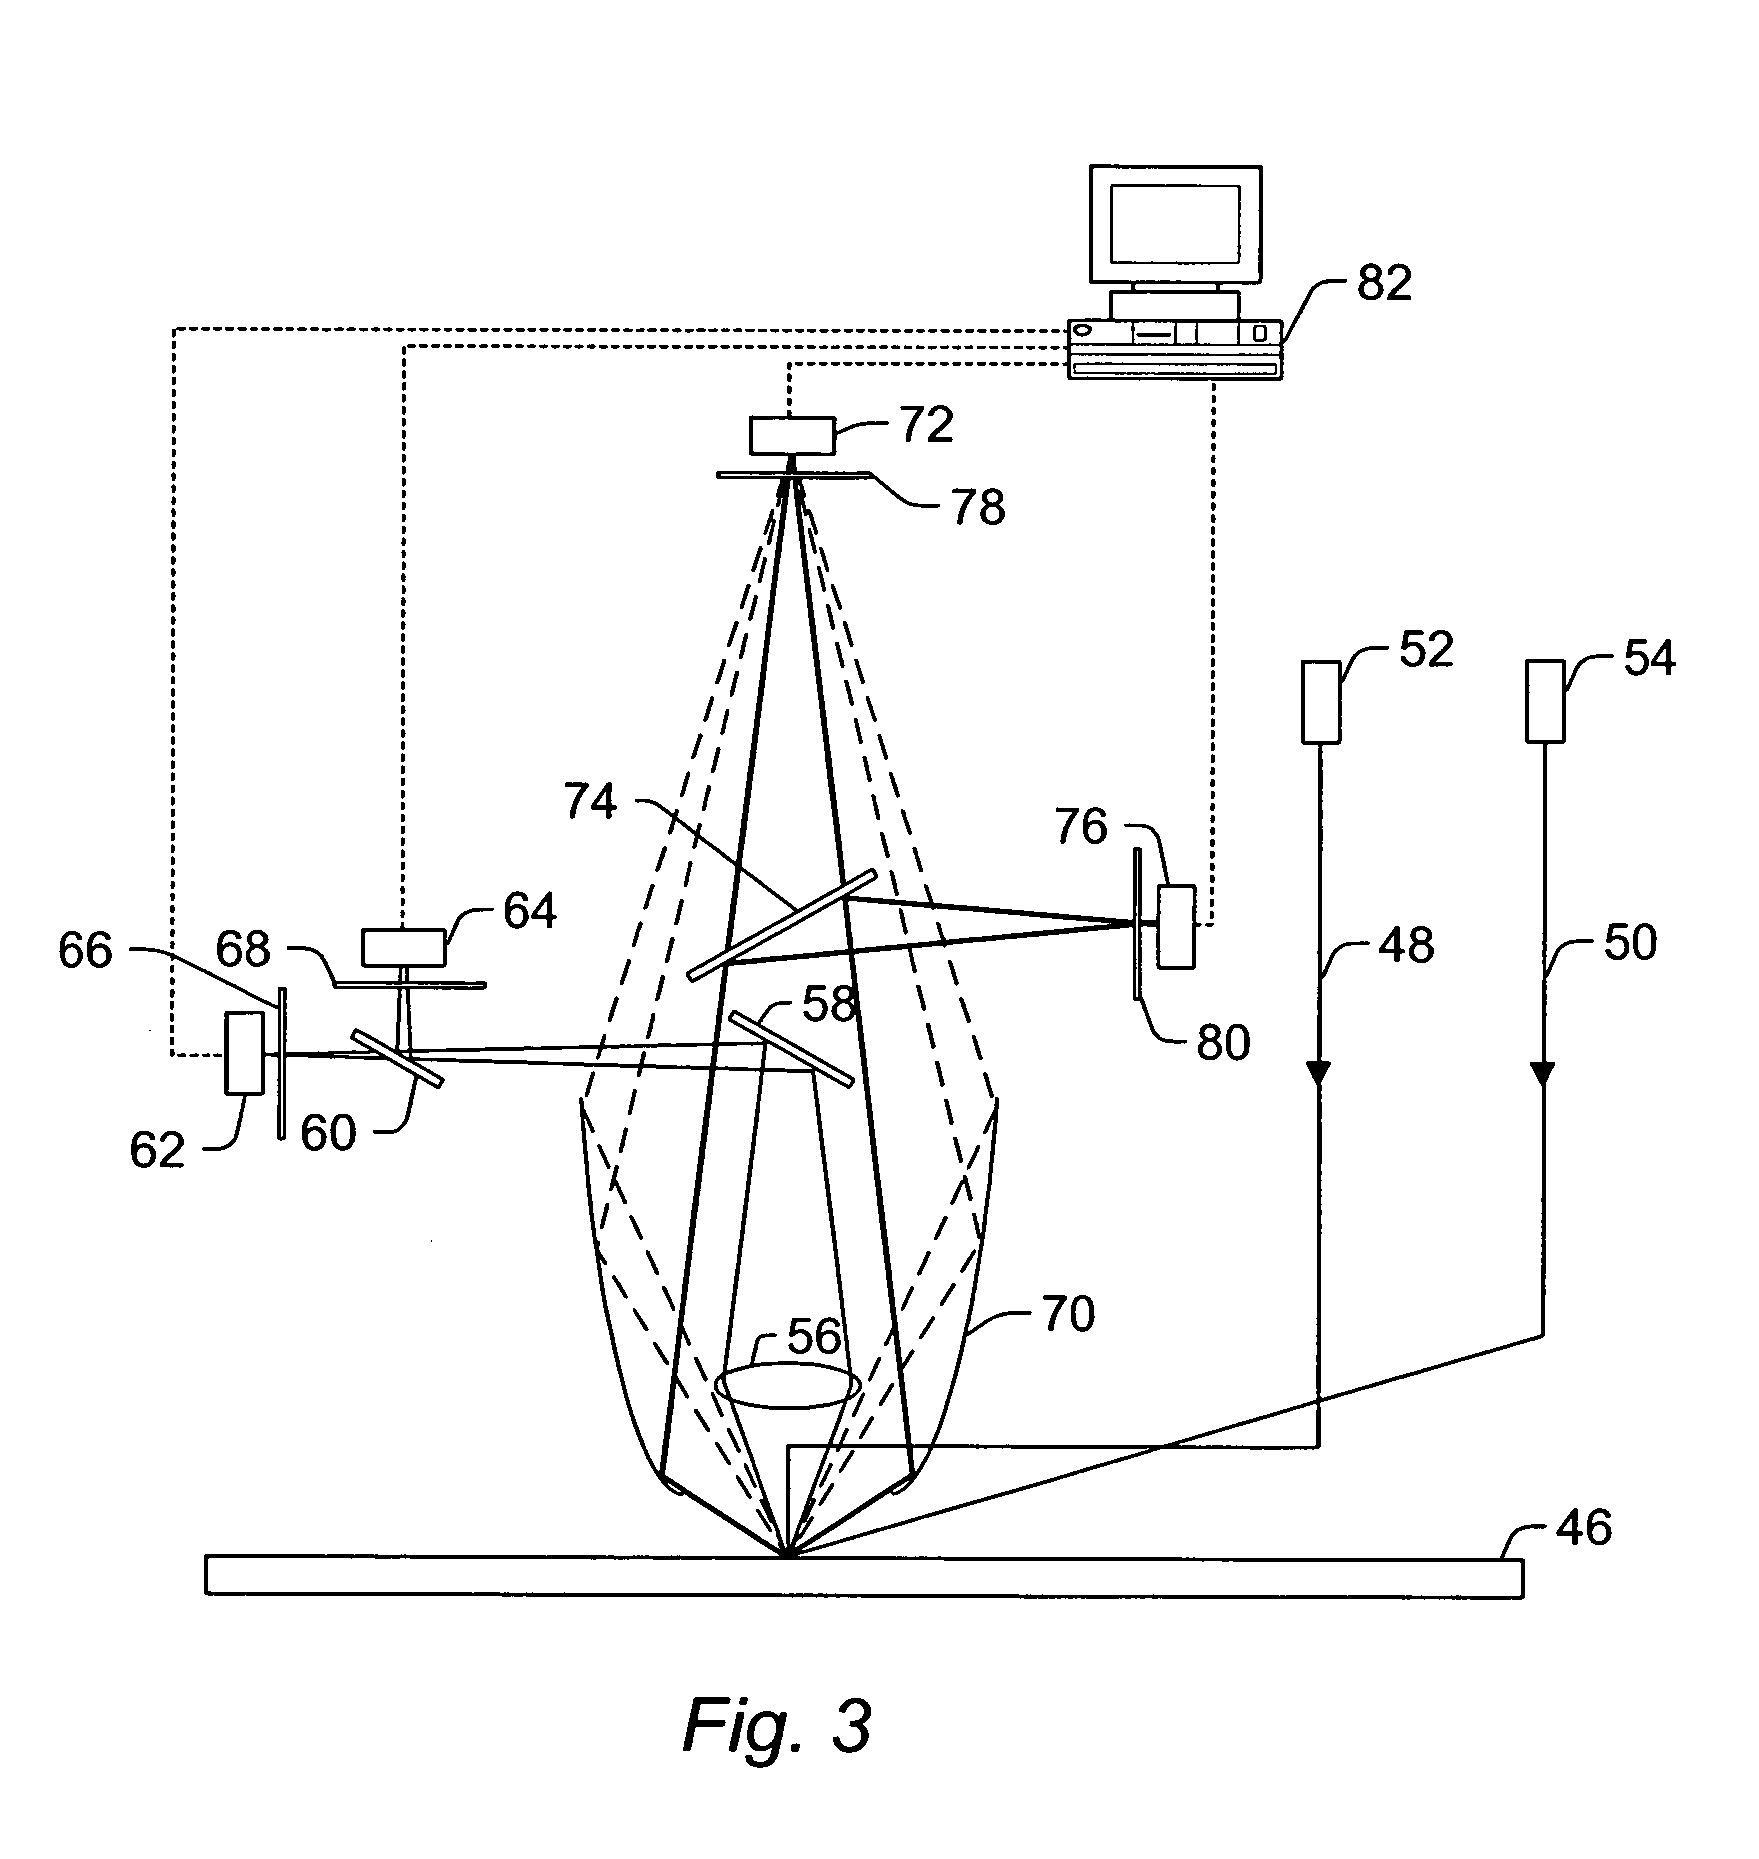 Methods and systems for inspecting a specimen using light scattered in different wavelength ranges